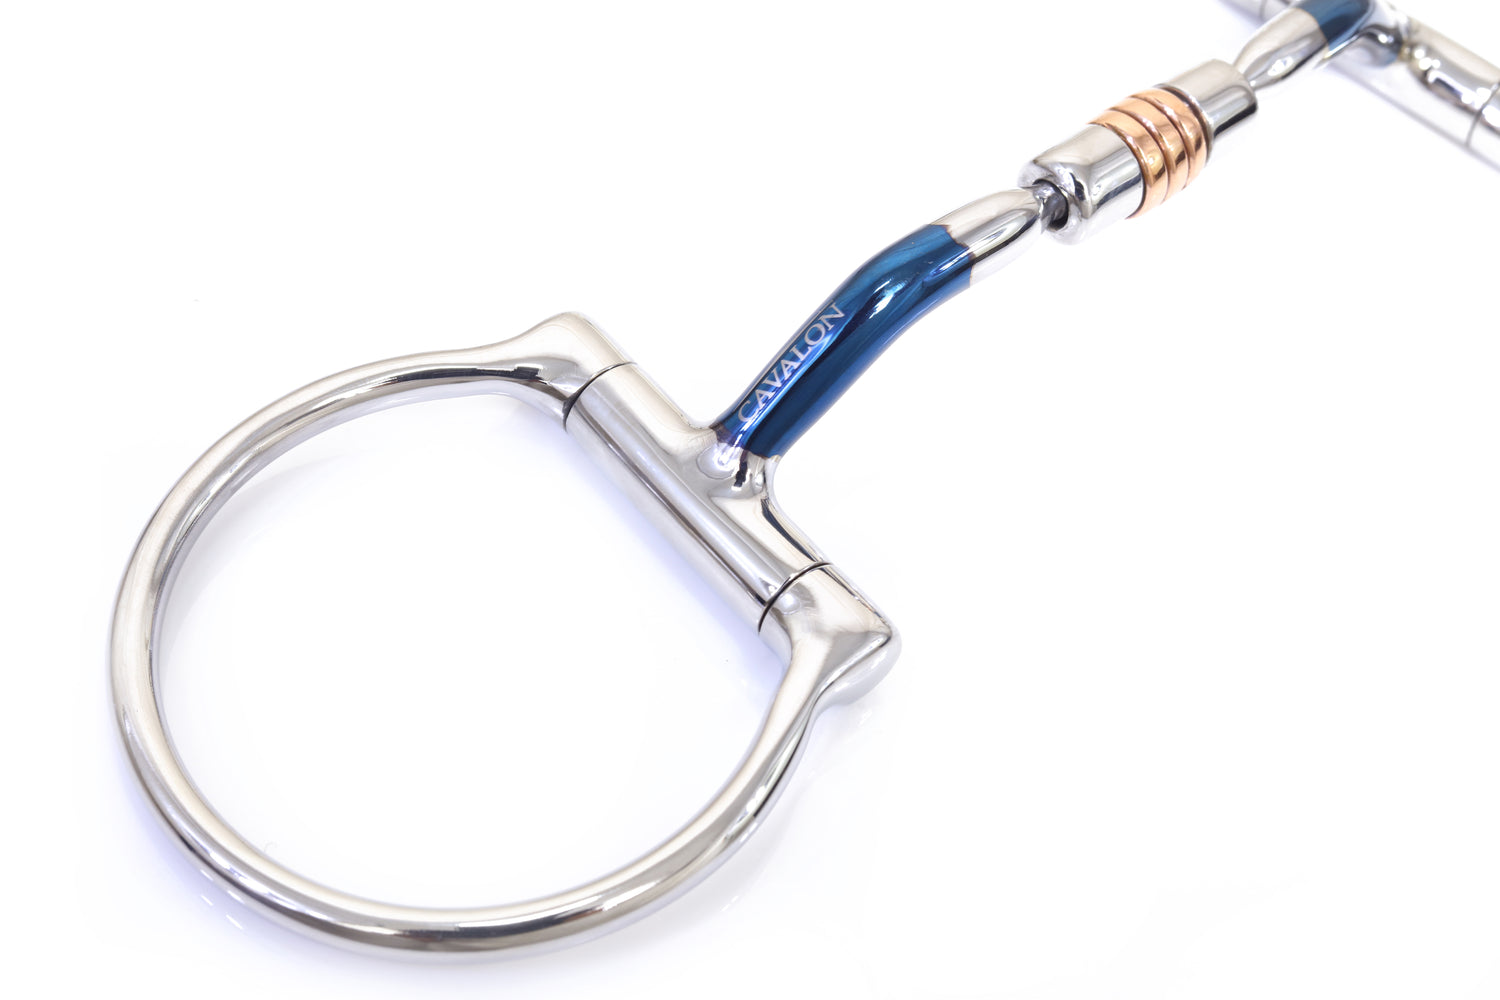 Western D-Ring Sweet Iron Barrel Snaffle Horse Bit with Copper Rollers